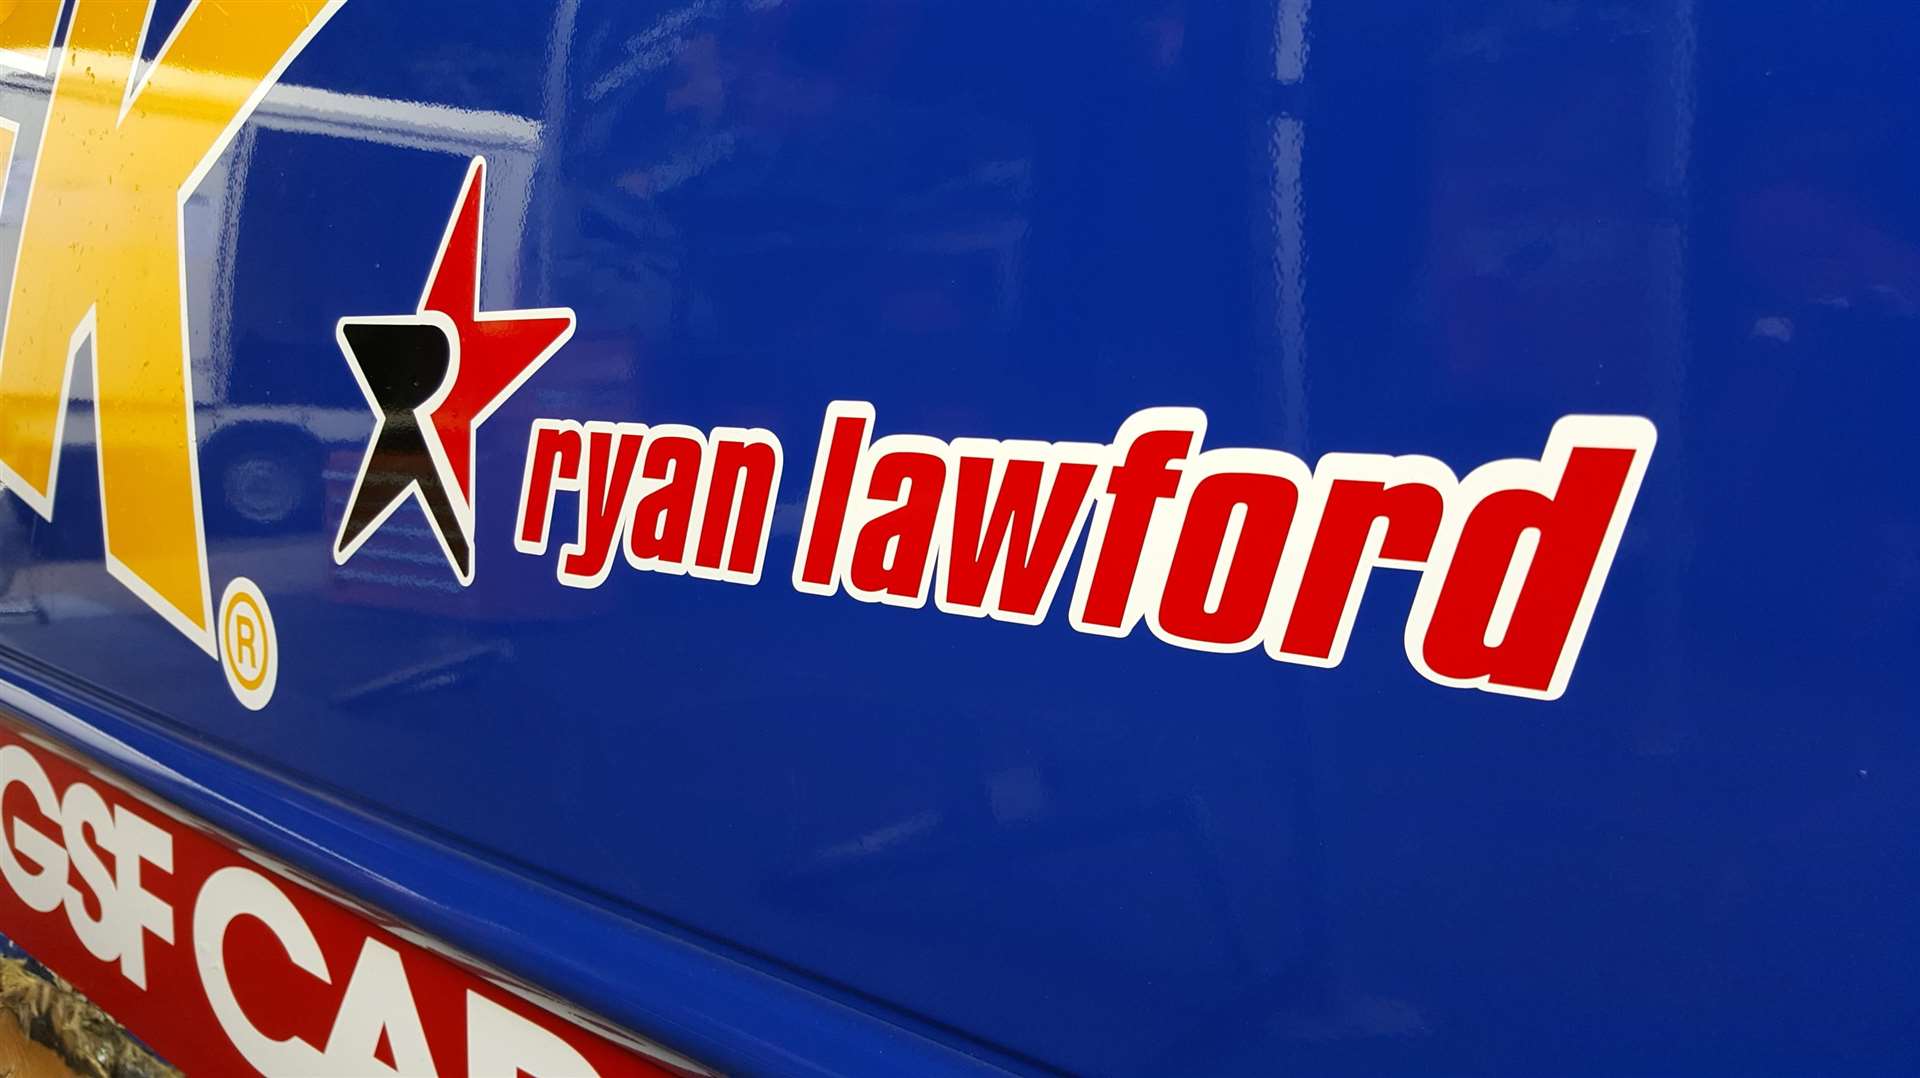 Ryan Lawford stickers appeared on a number of cars